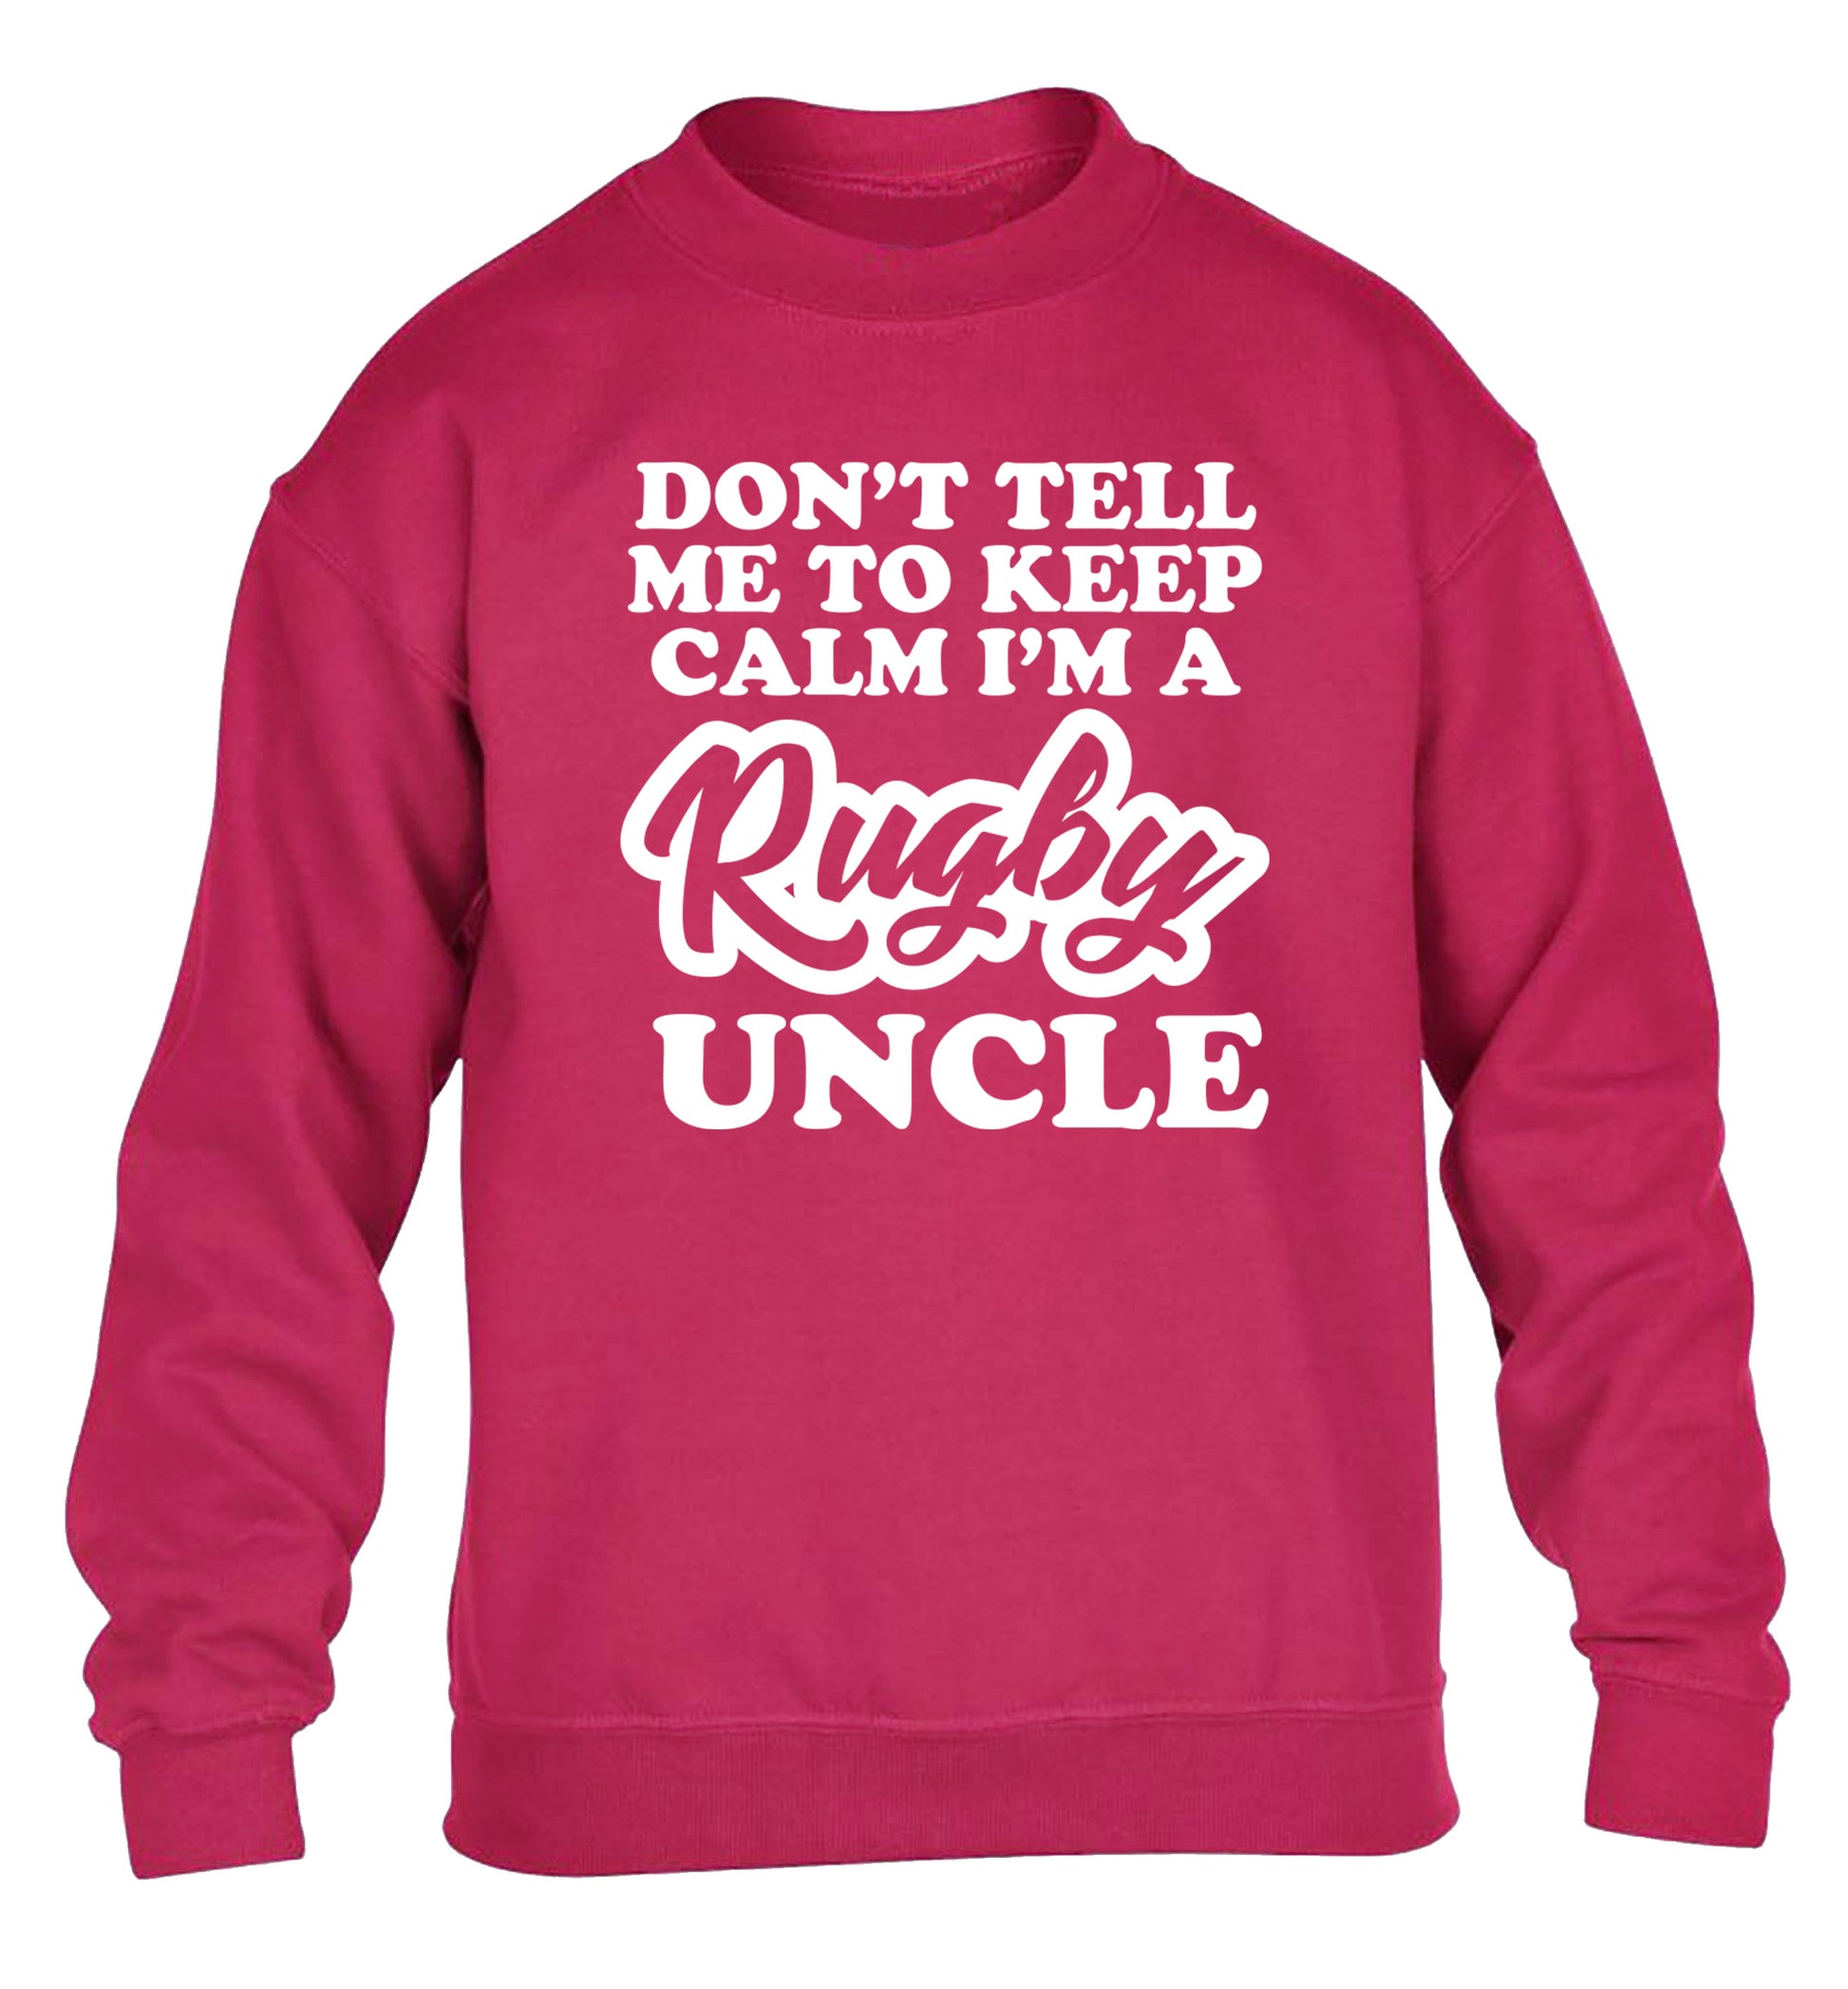 Don't tell me to keep calm I'm a rugby uncle children's pink sweater 12-13 Years